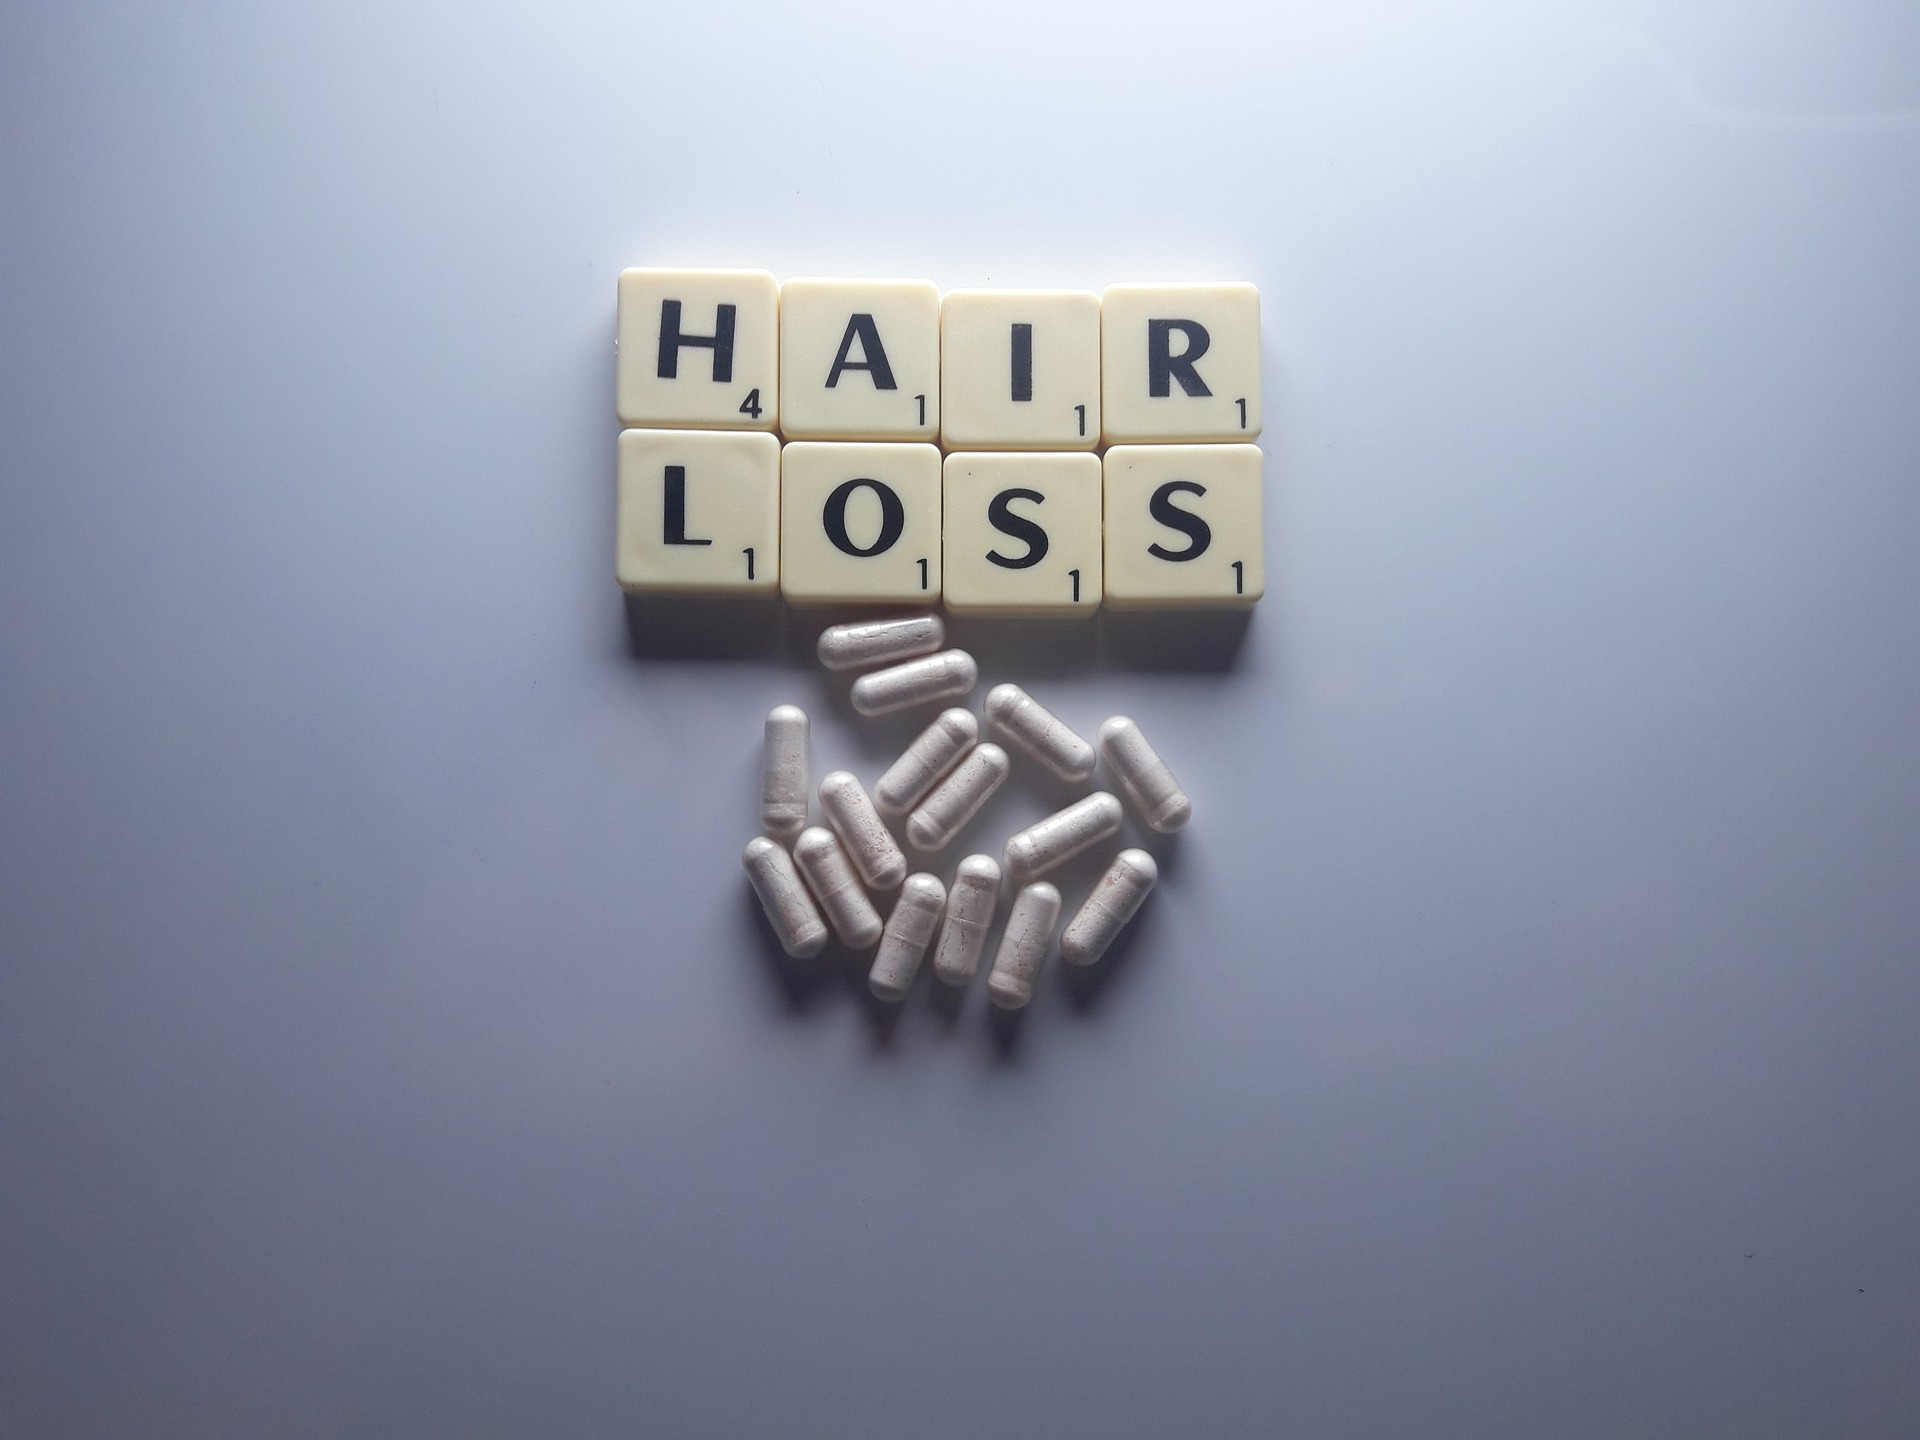 Why covid-19 hair loss sounds worse than it really is